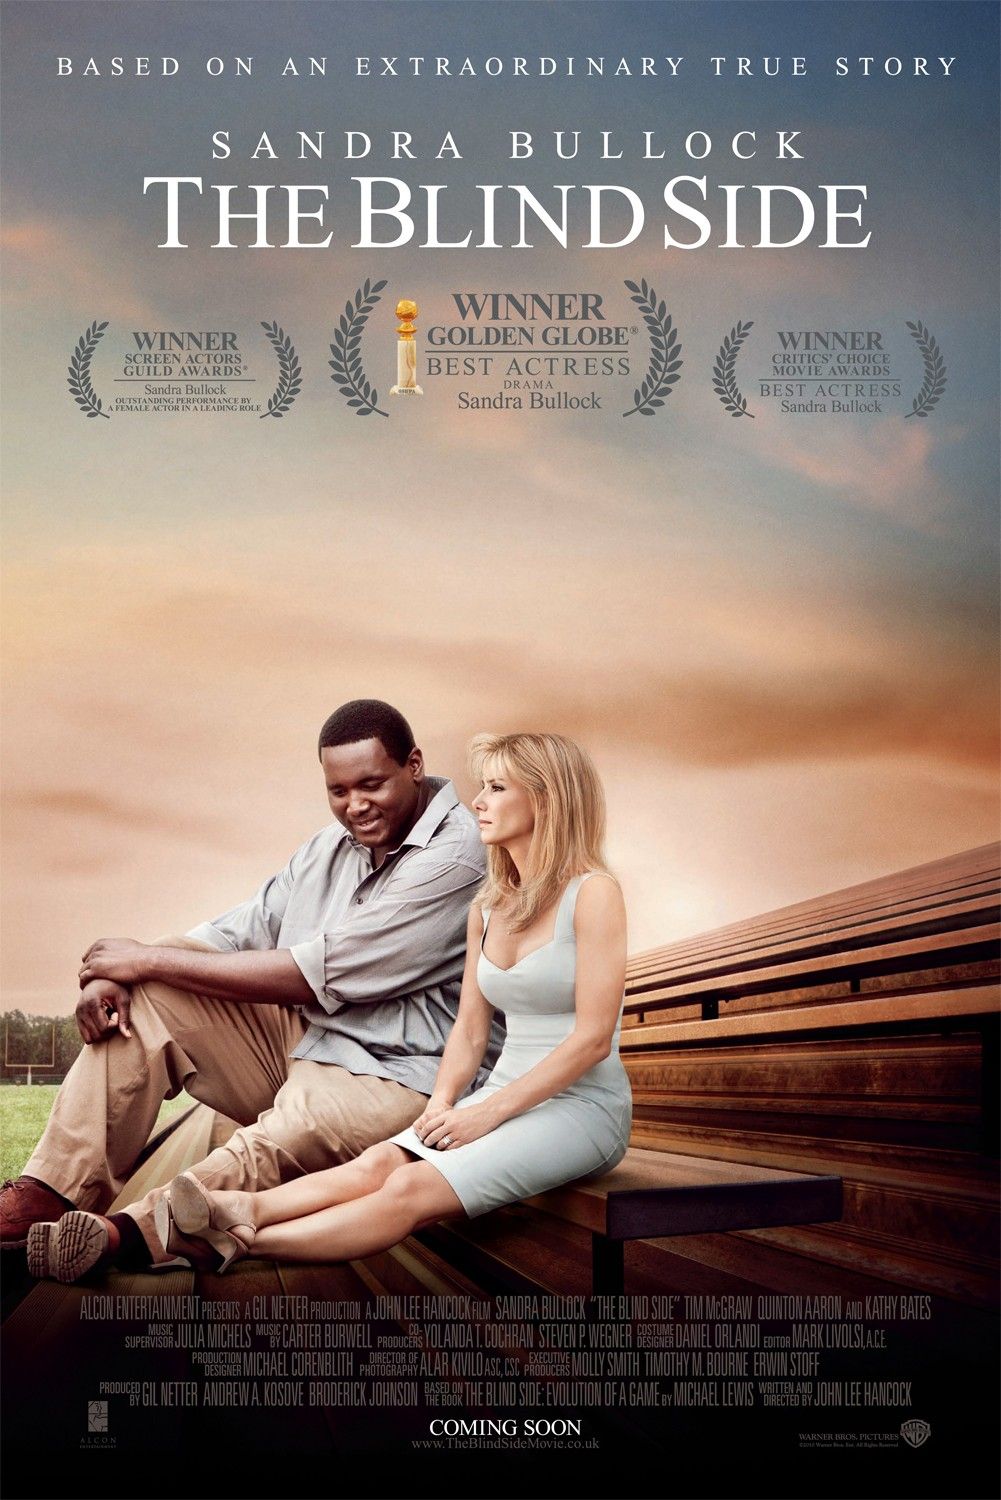 The Blind Side (2009) Posters (1 of 2)